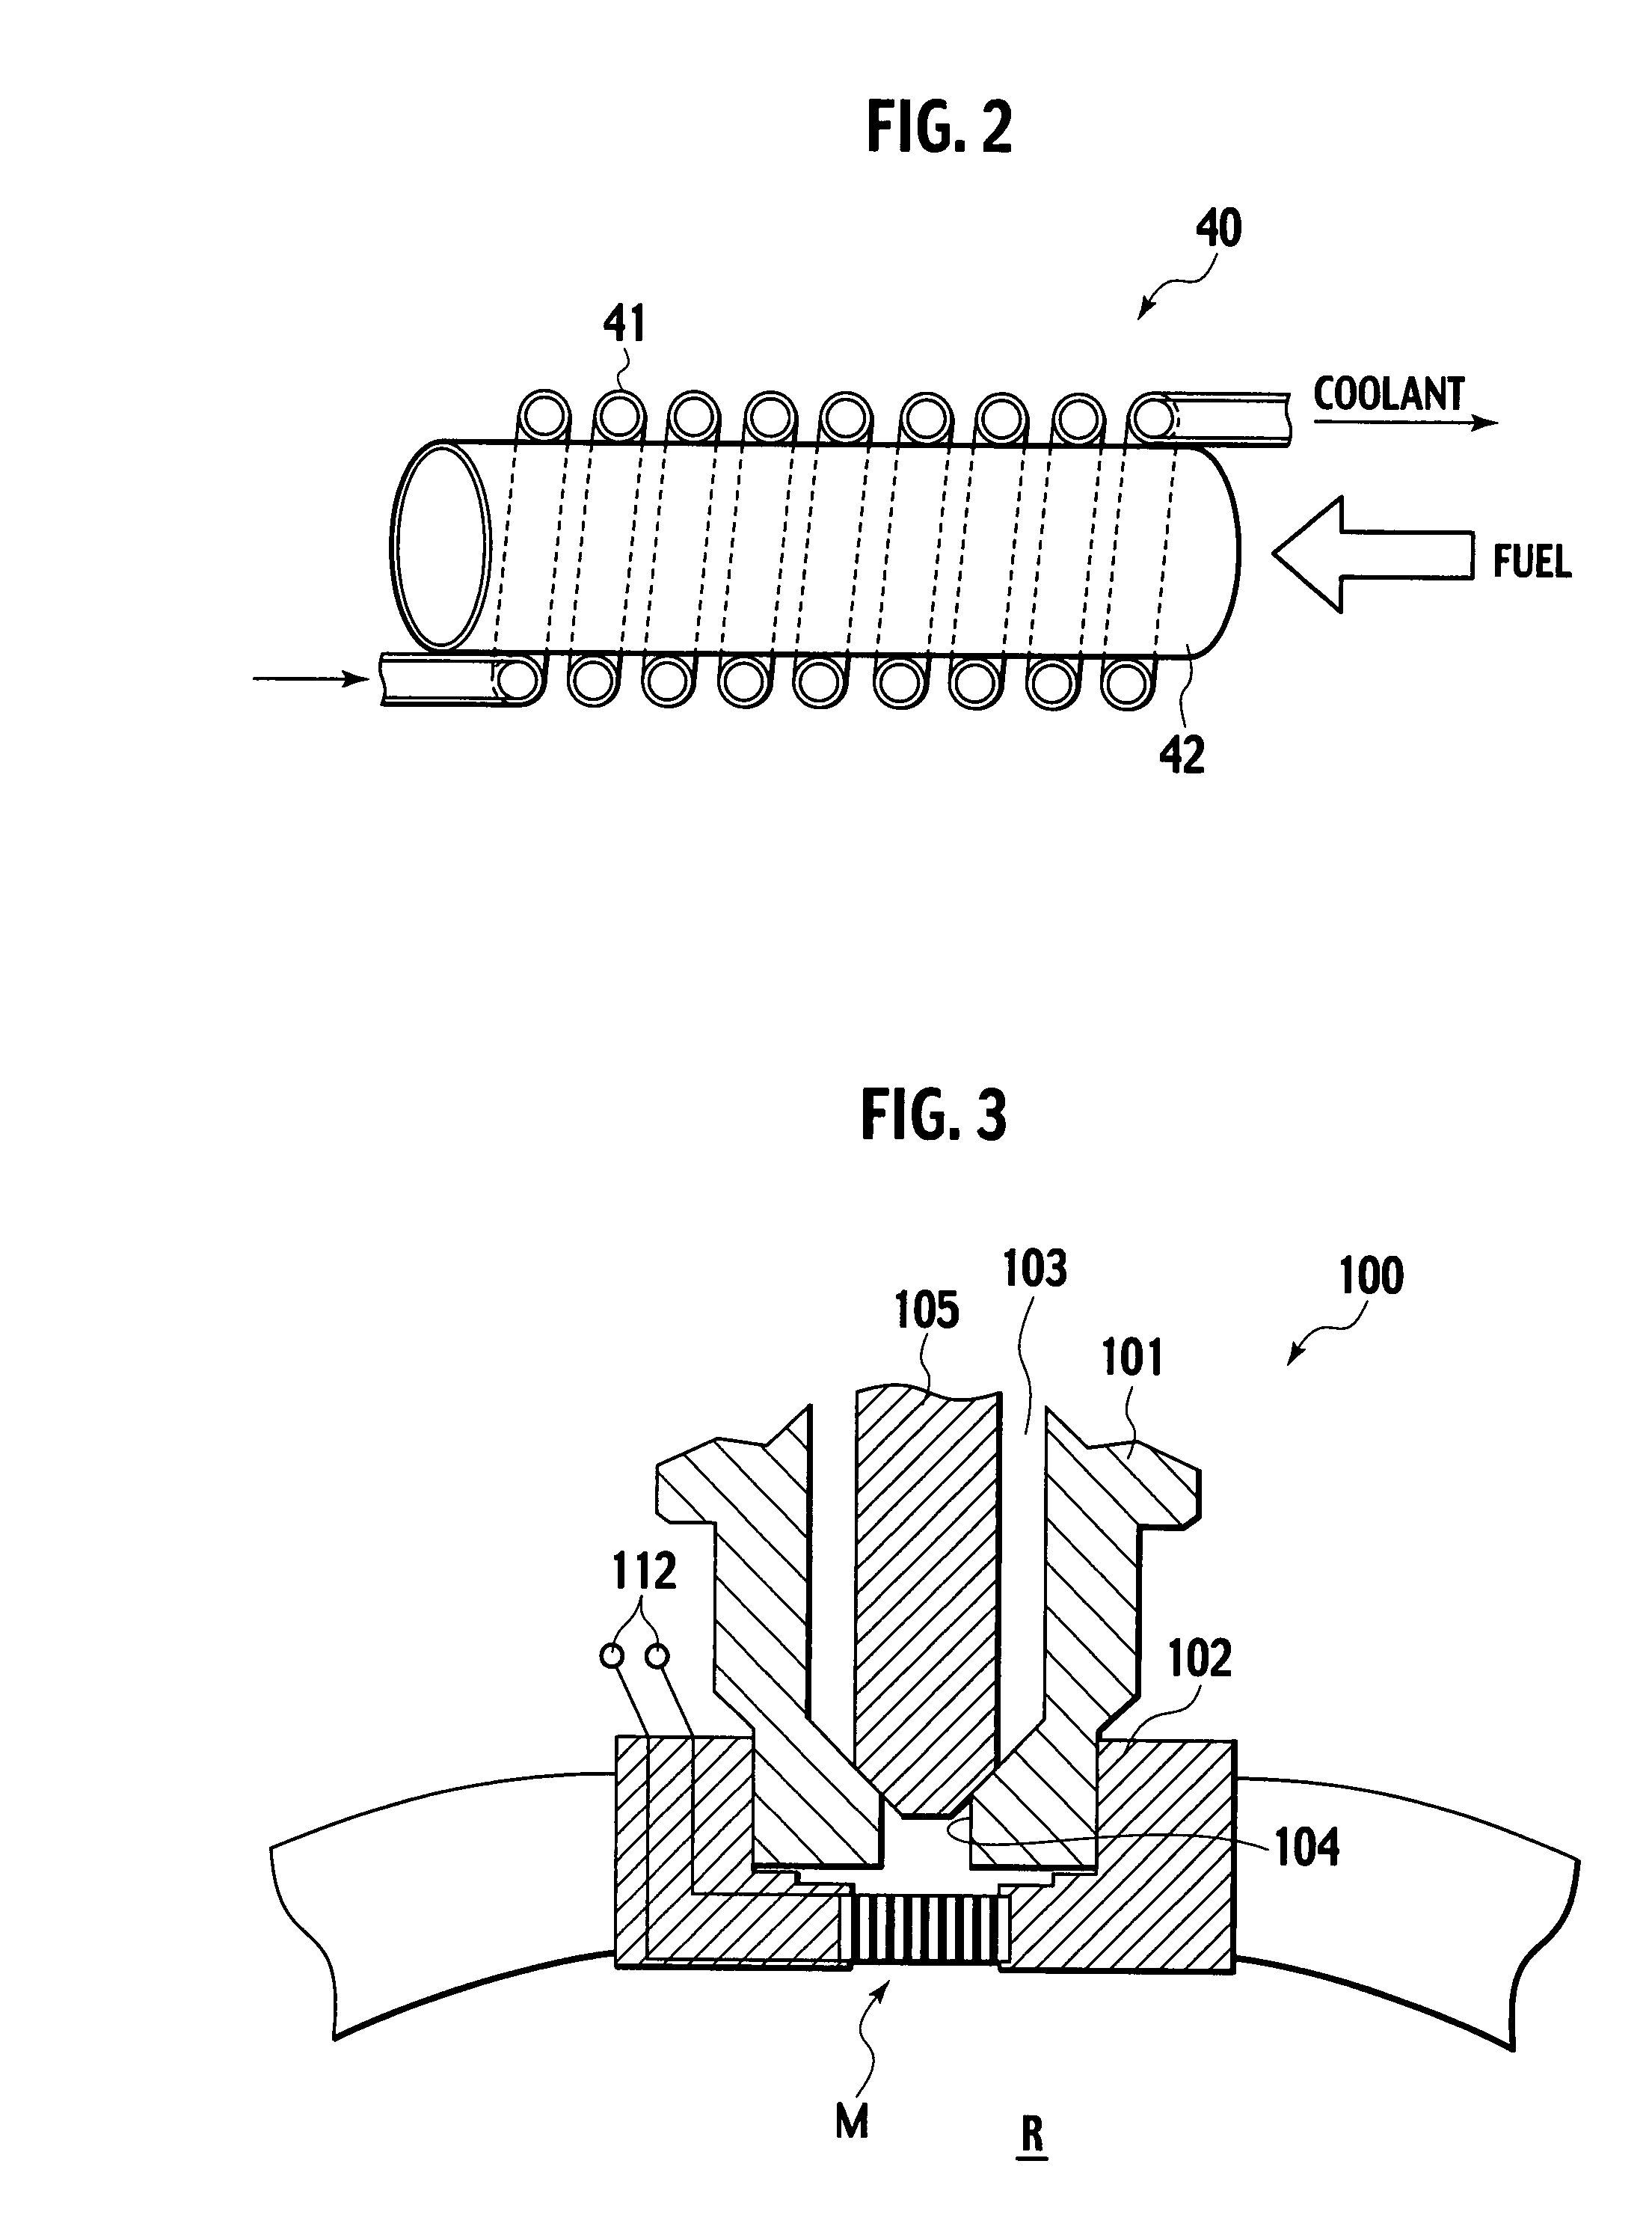 Fuel injection system of internal combustion engine, and fuel injection method of the internal combustion engine